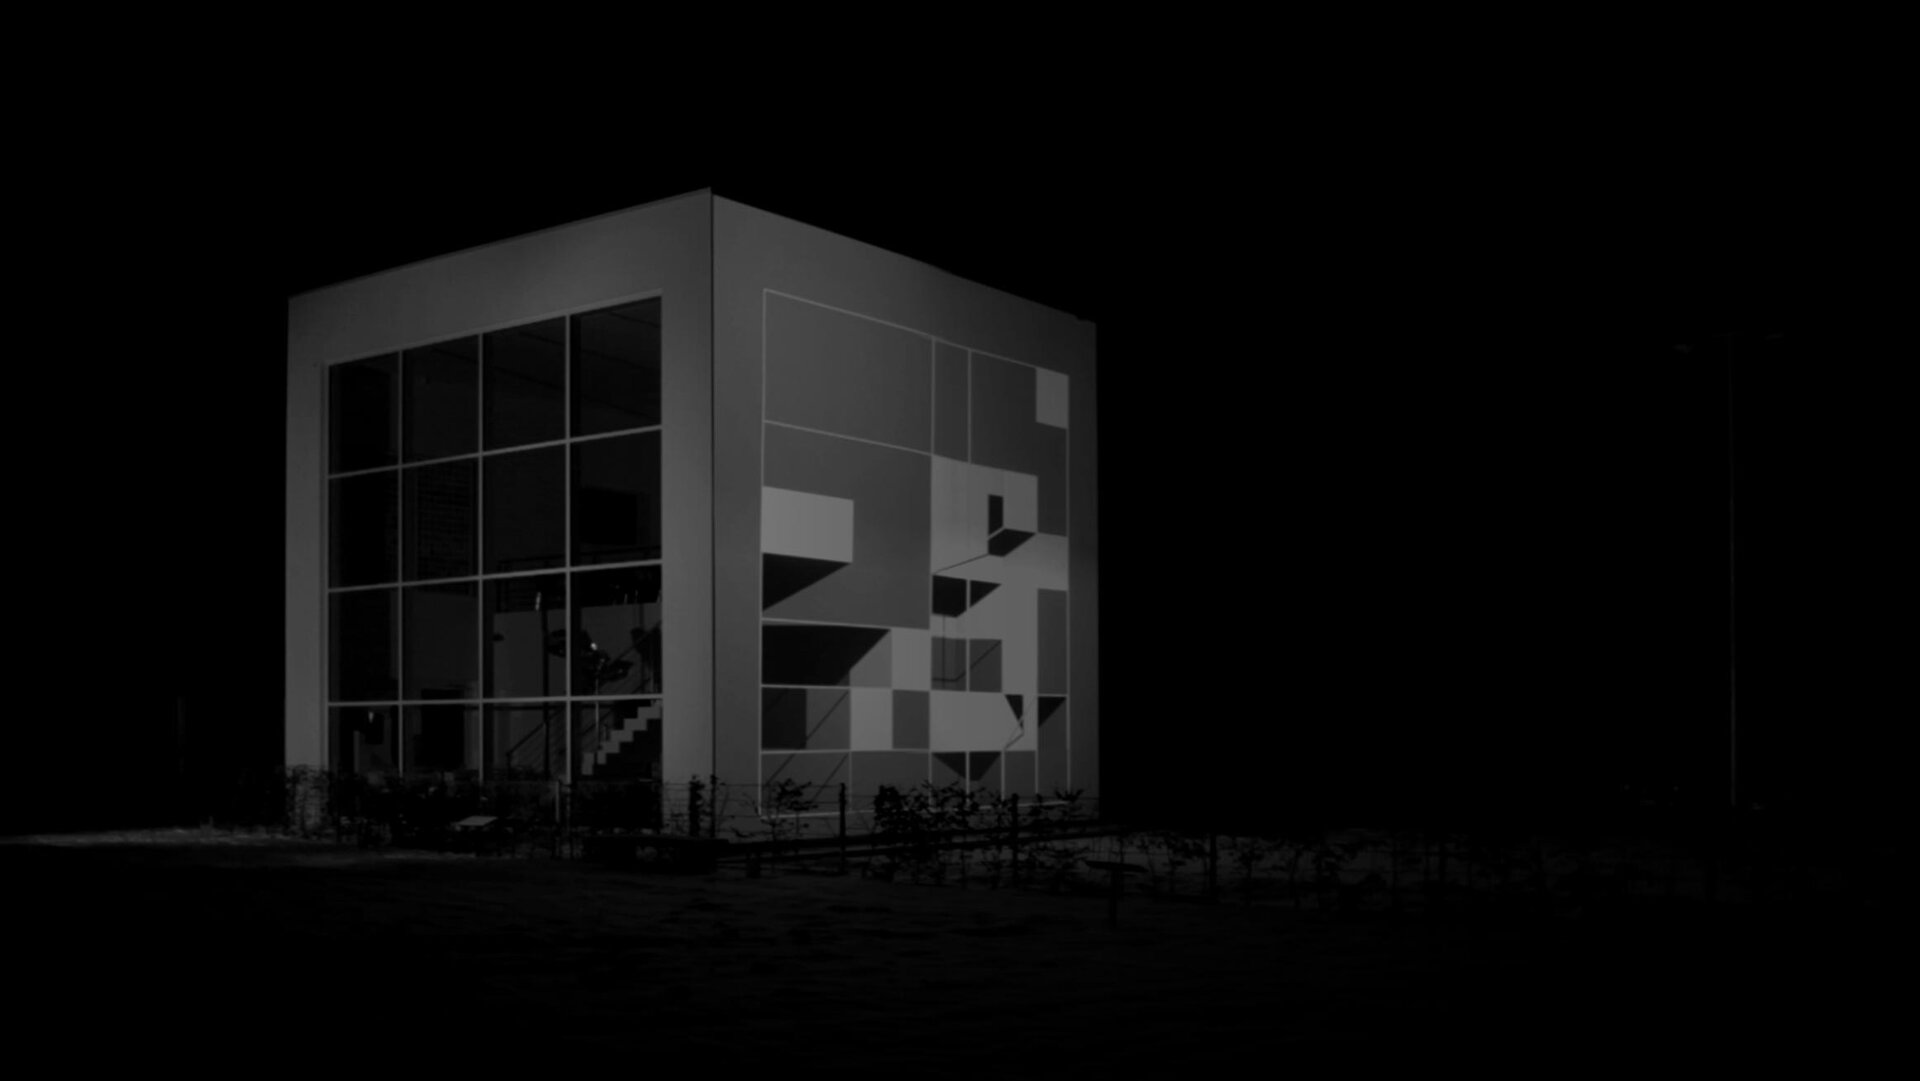 Projections on the white cube